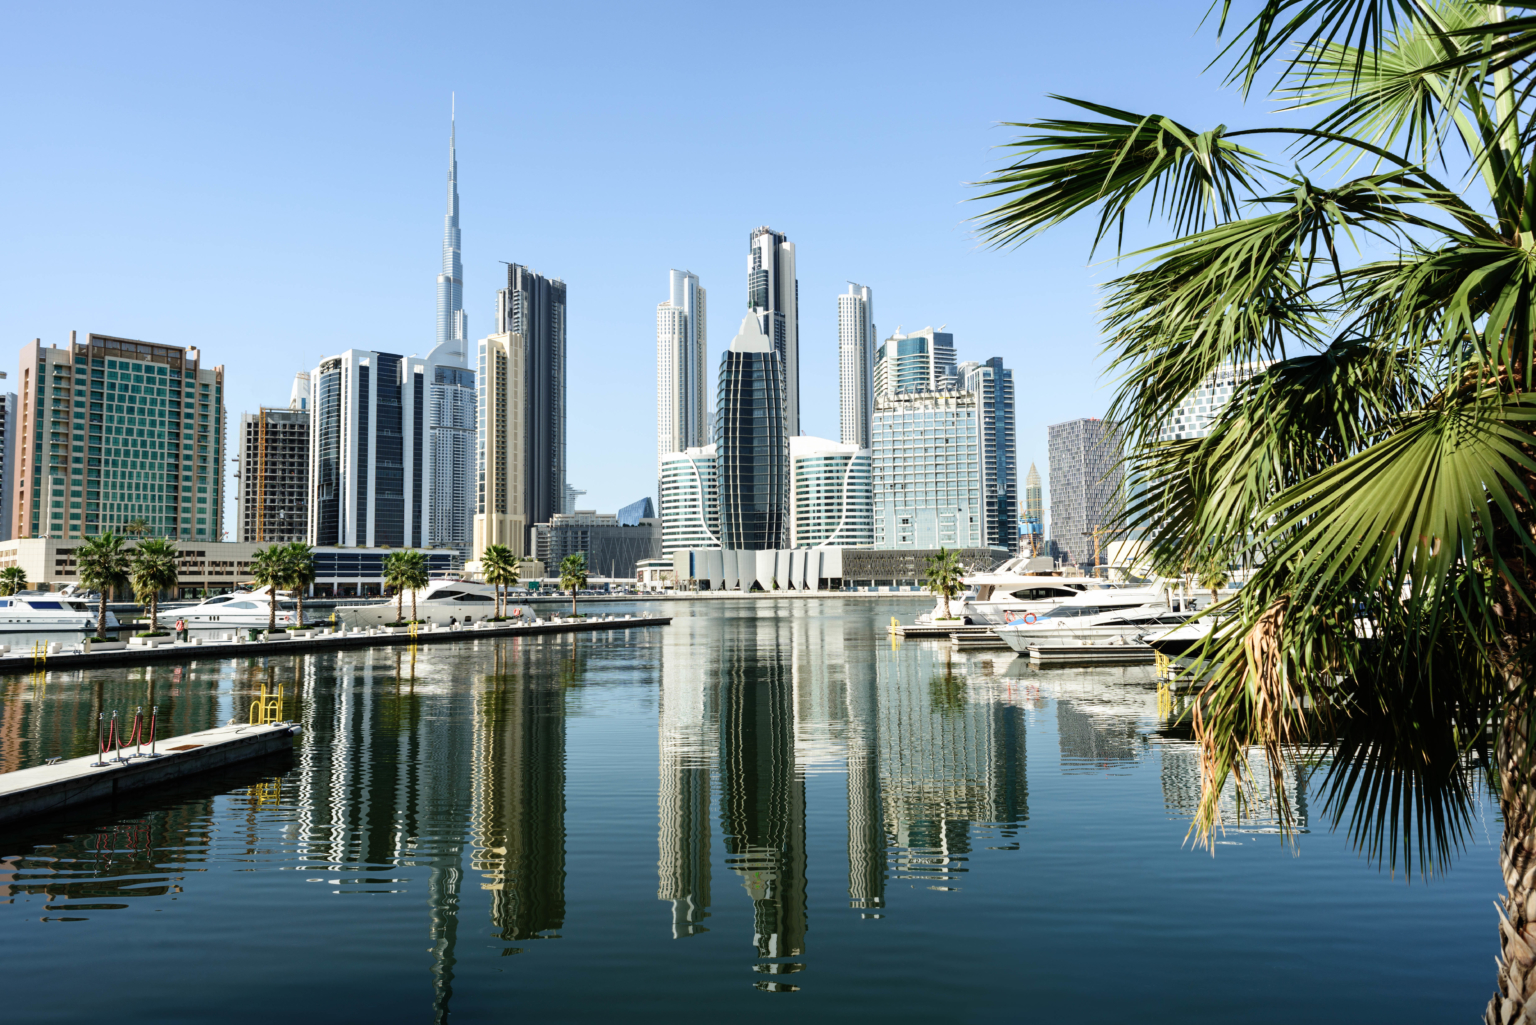 the downtown Dubai skyline with water and a palm tree in the foreground